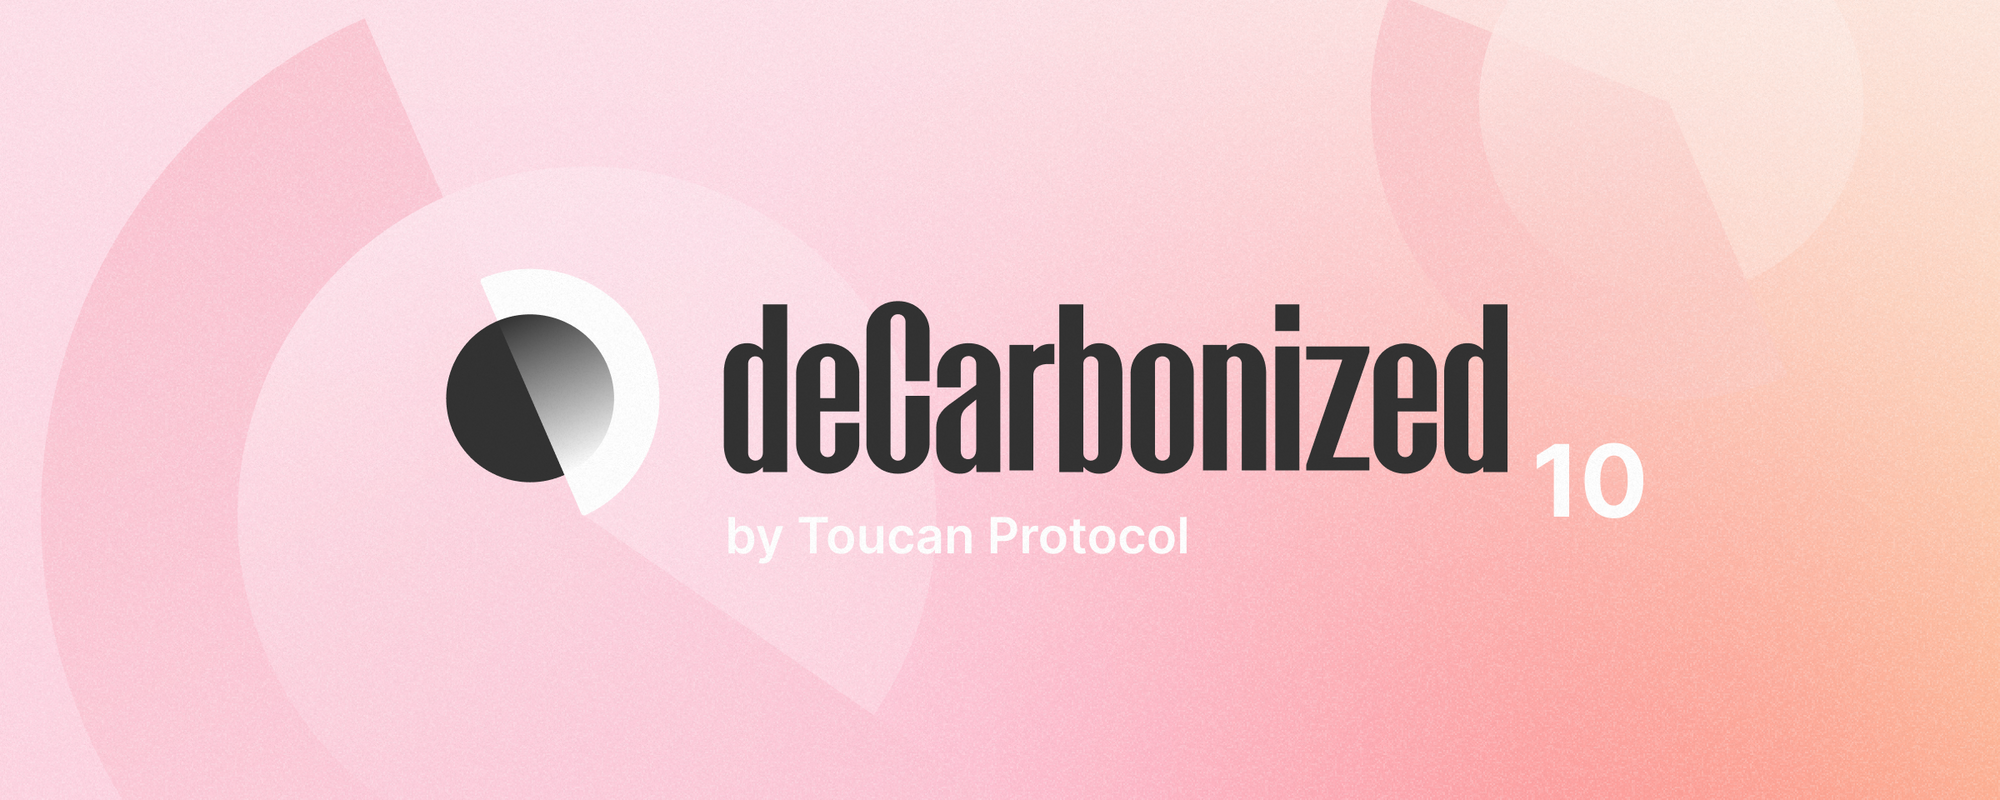 deCarbonized #10: Economic co-benefits, 9 actions to scale carbon removals